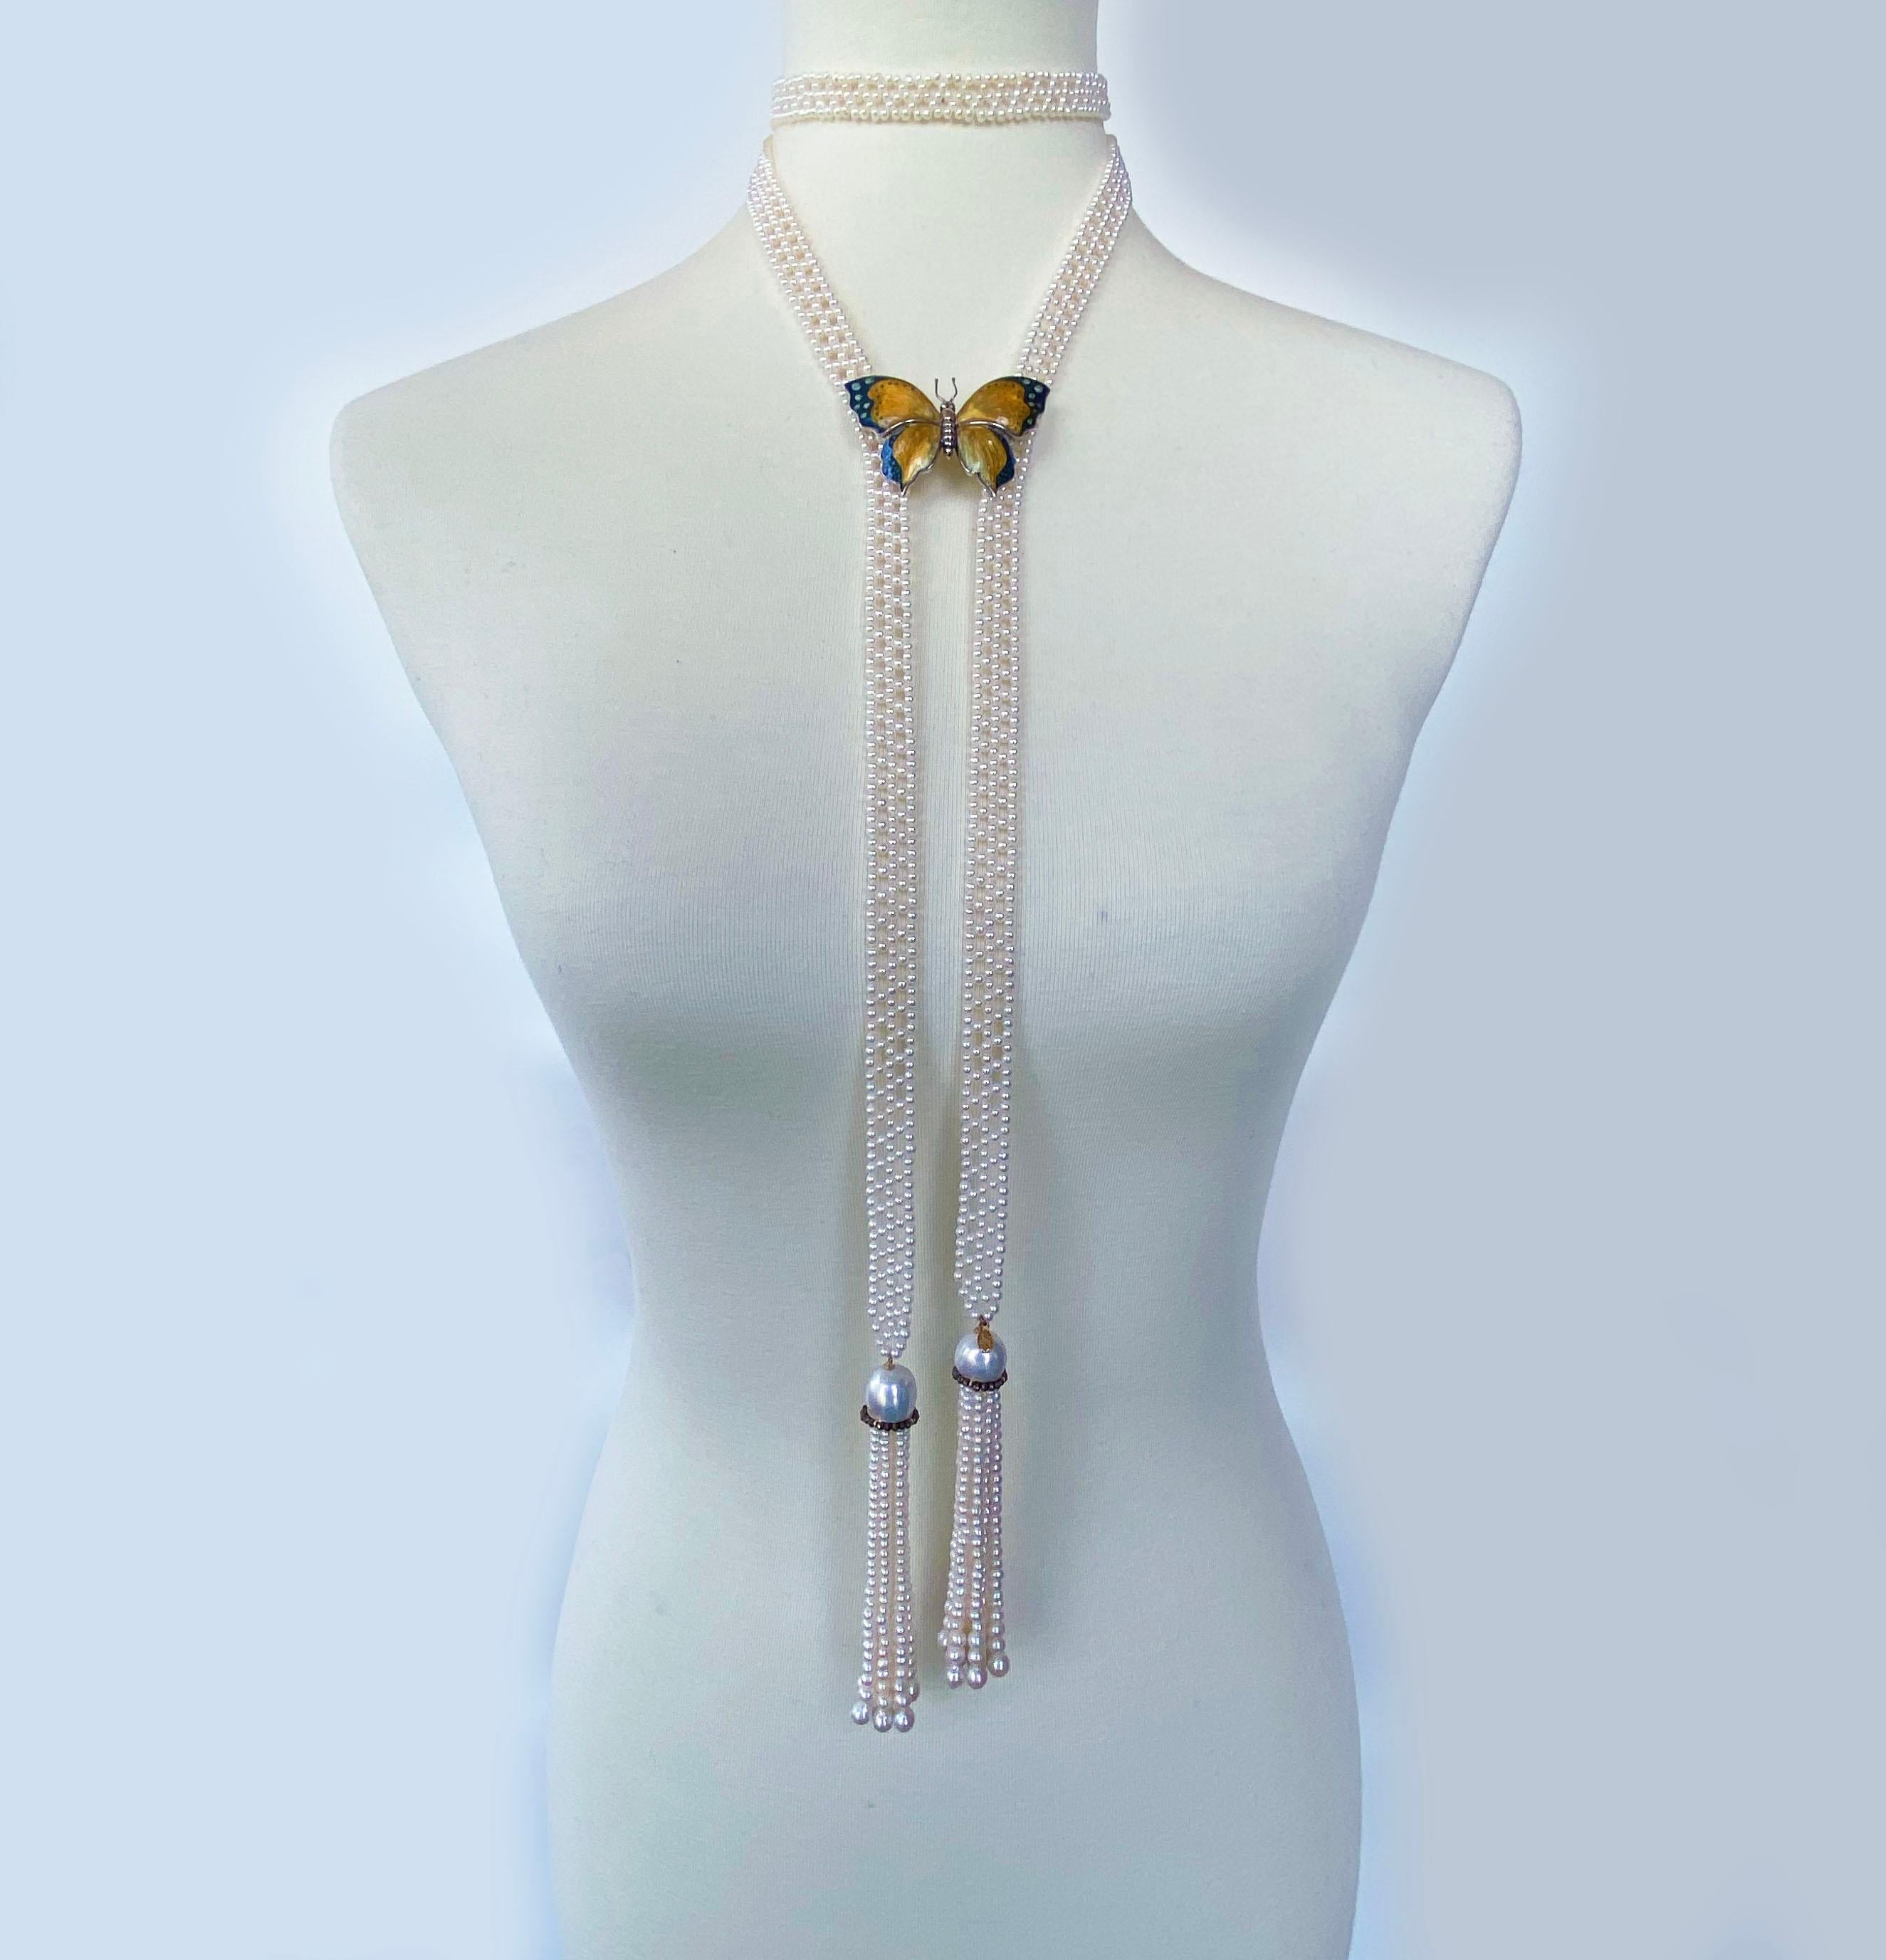 Marina J. Woven White Pearl Sautoir Necklace with Black Spinel & 14k Yellow Gold 7